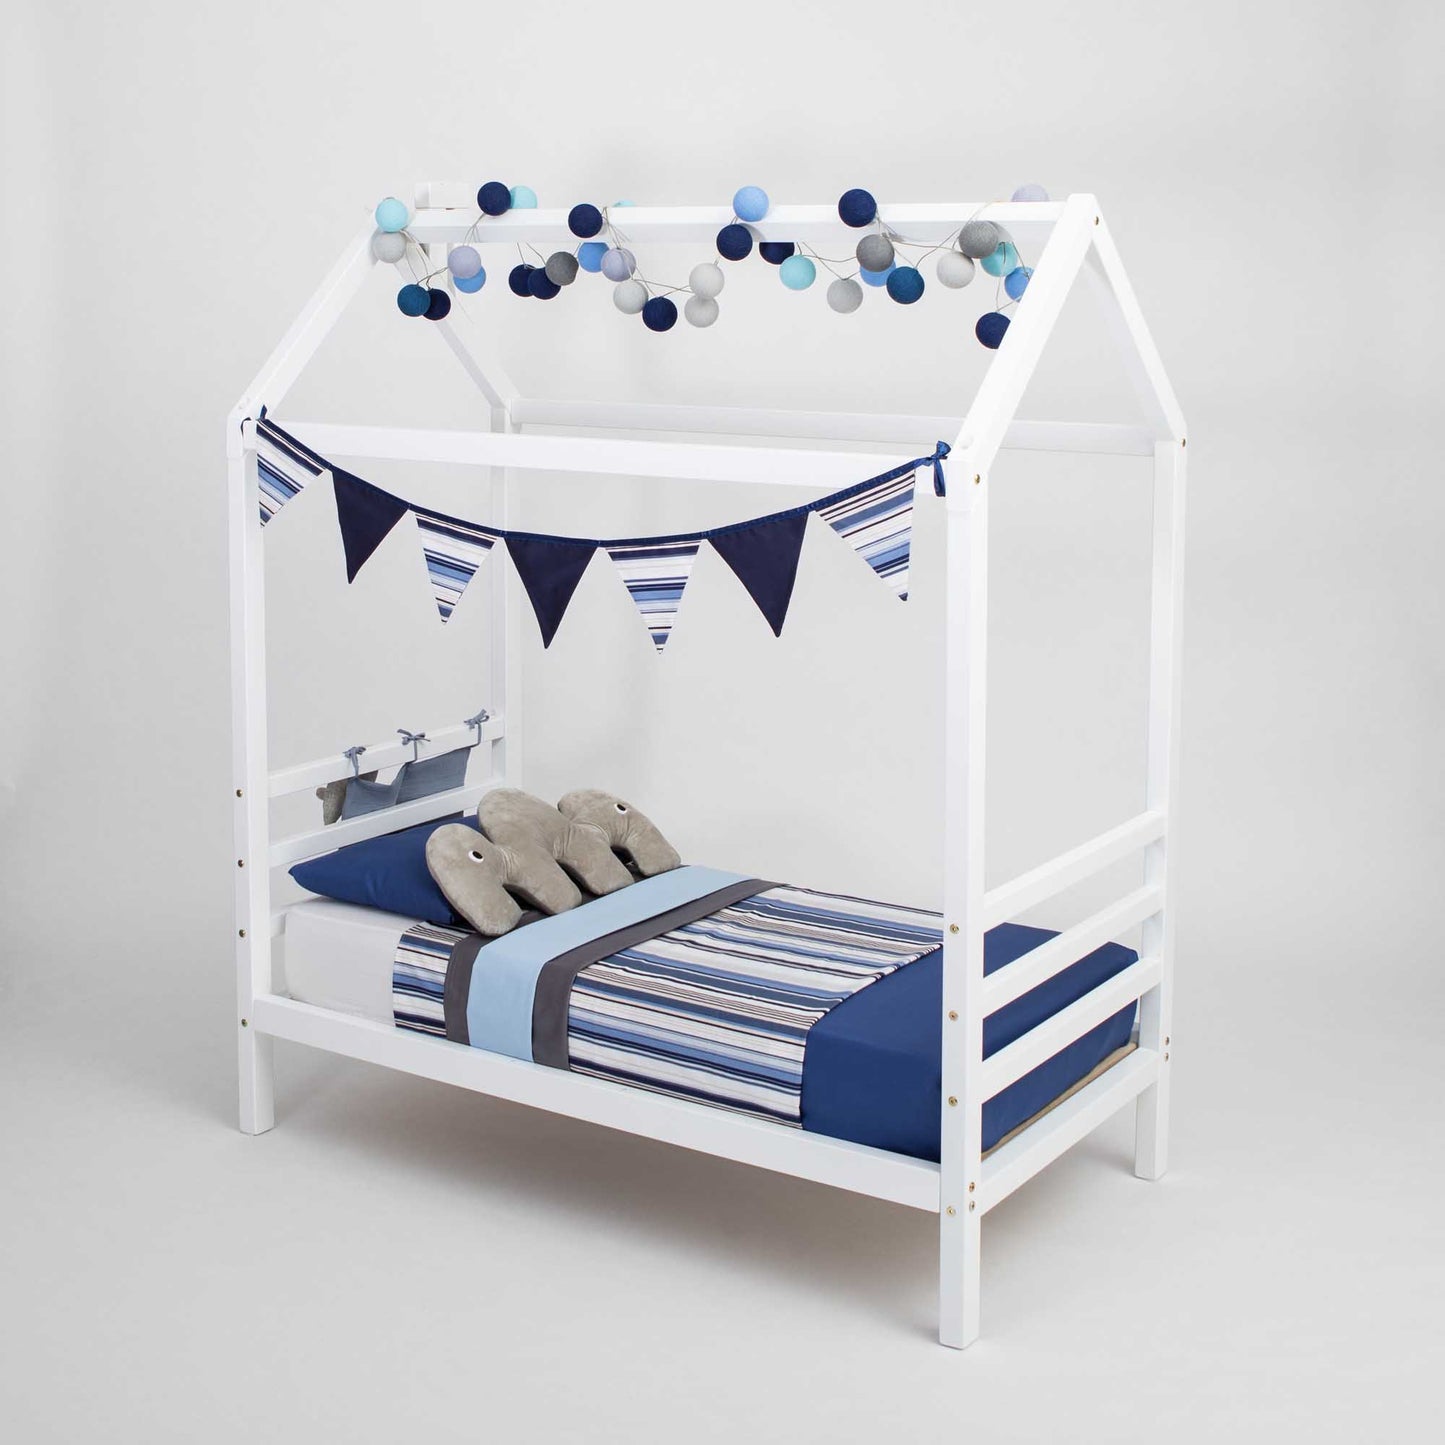 A Kids' house bed on legs with a headboard and footboard, with blue and white stripes and bunting.